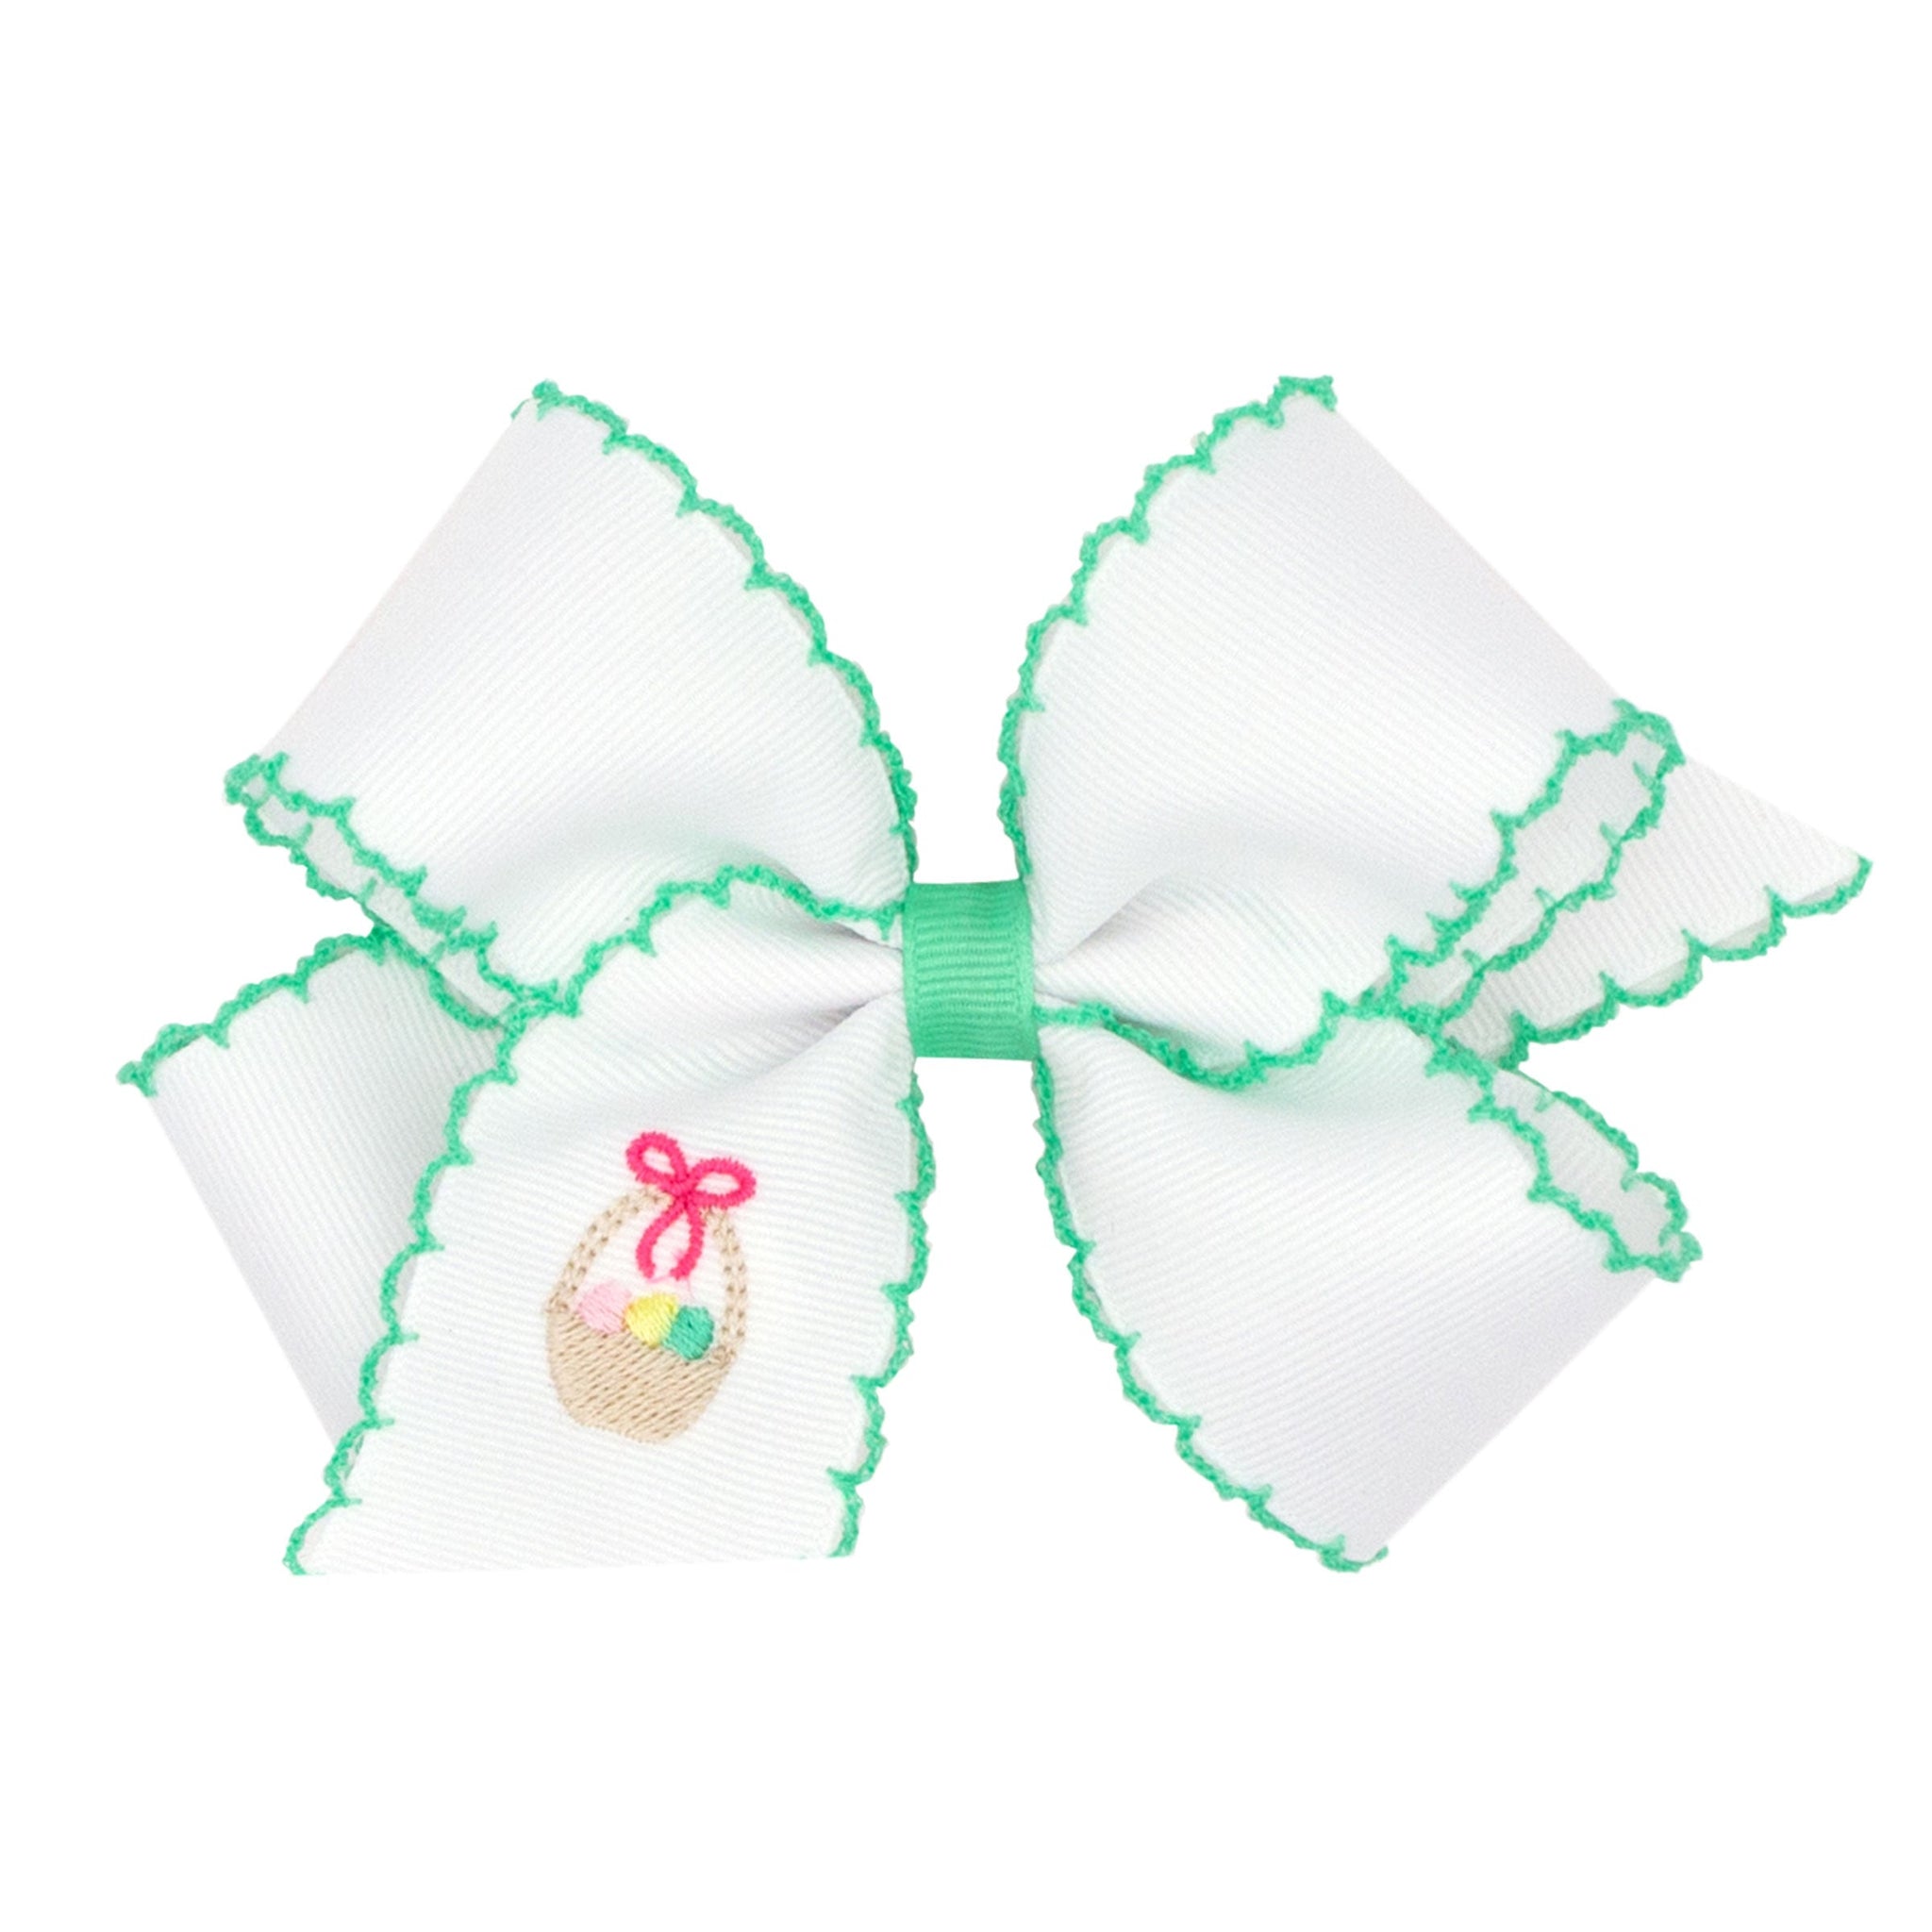 Medium Moonstitch on White Grosgrain Bow with Easter- Inspired Embroidered